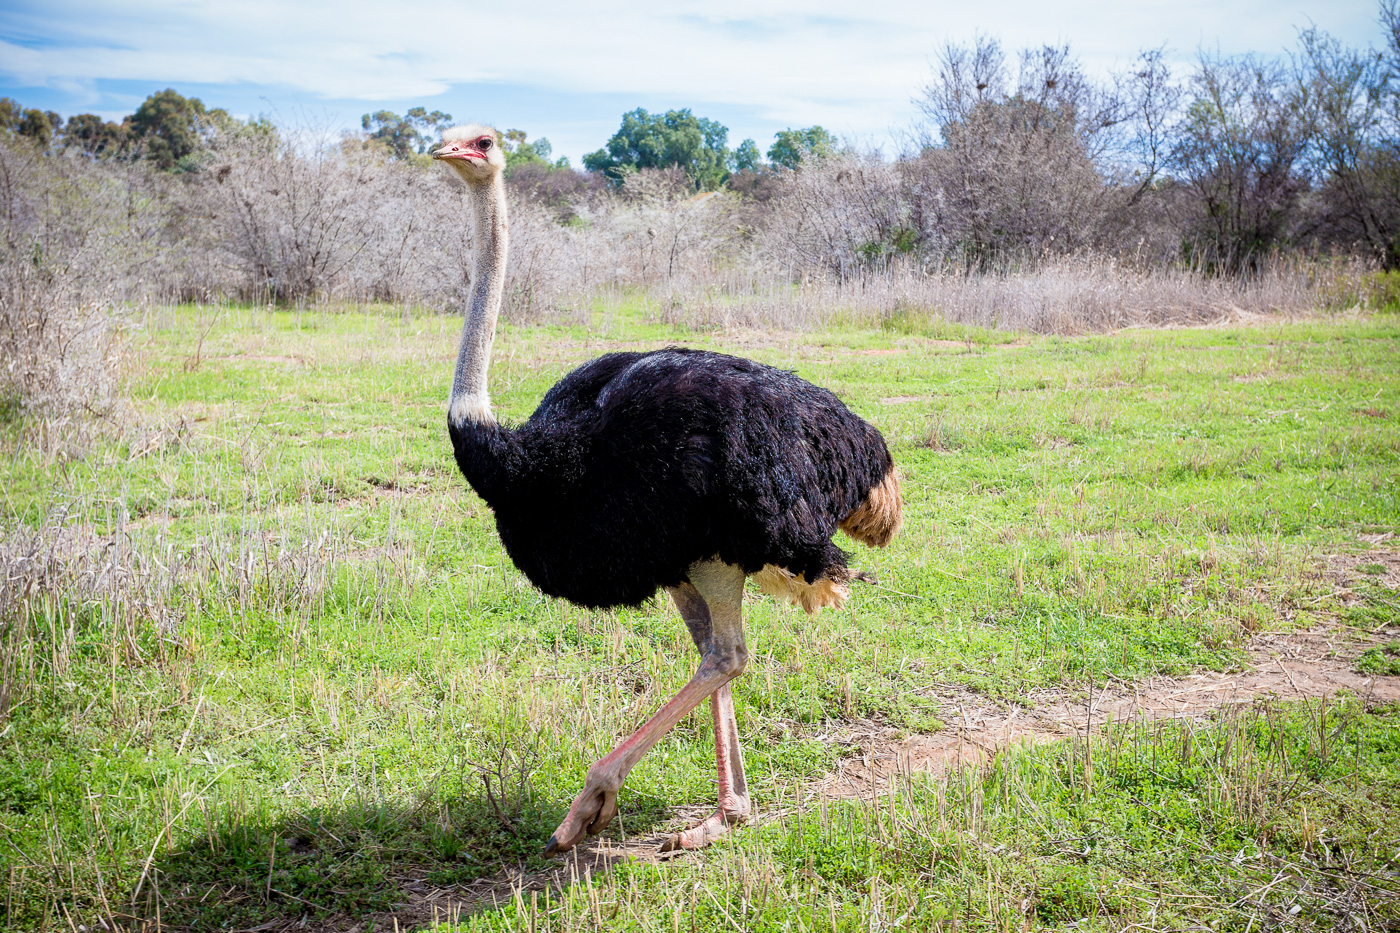 Can You Pass This General Knowledge “True or False” Quiz? ostrich